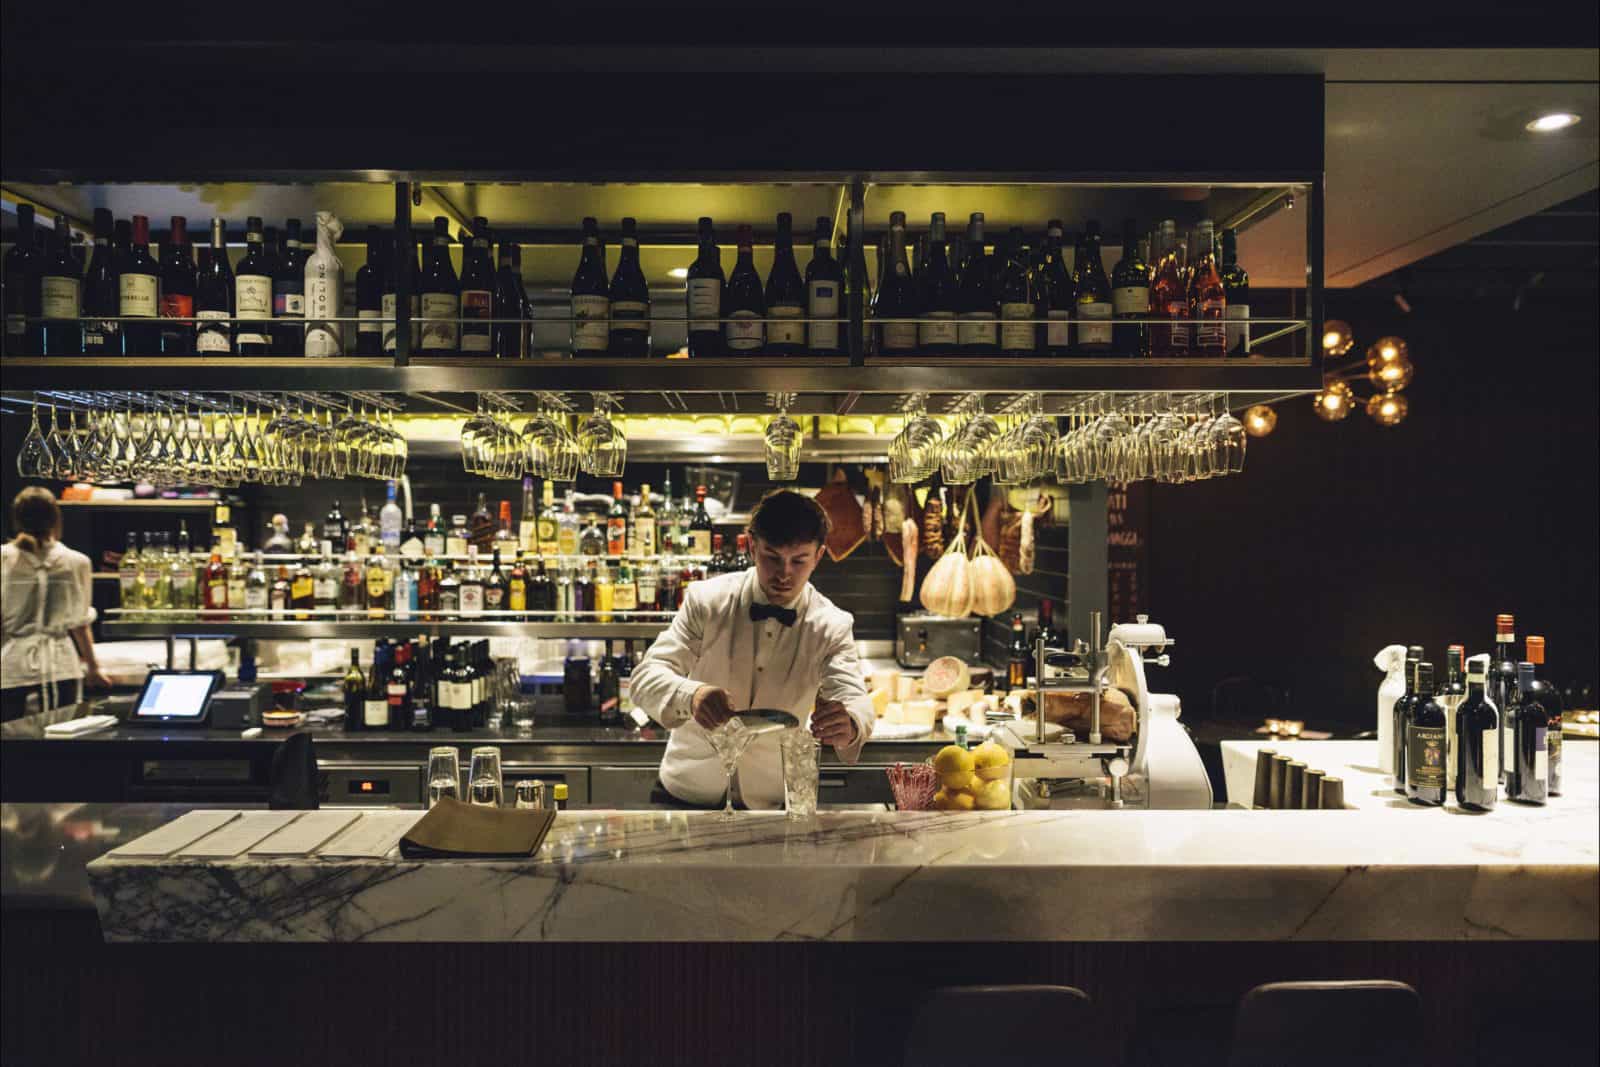 Barman pouring drinks at a marble bar